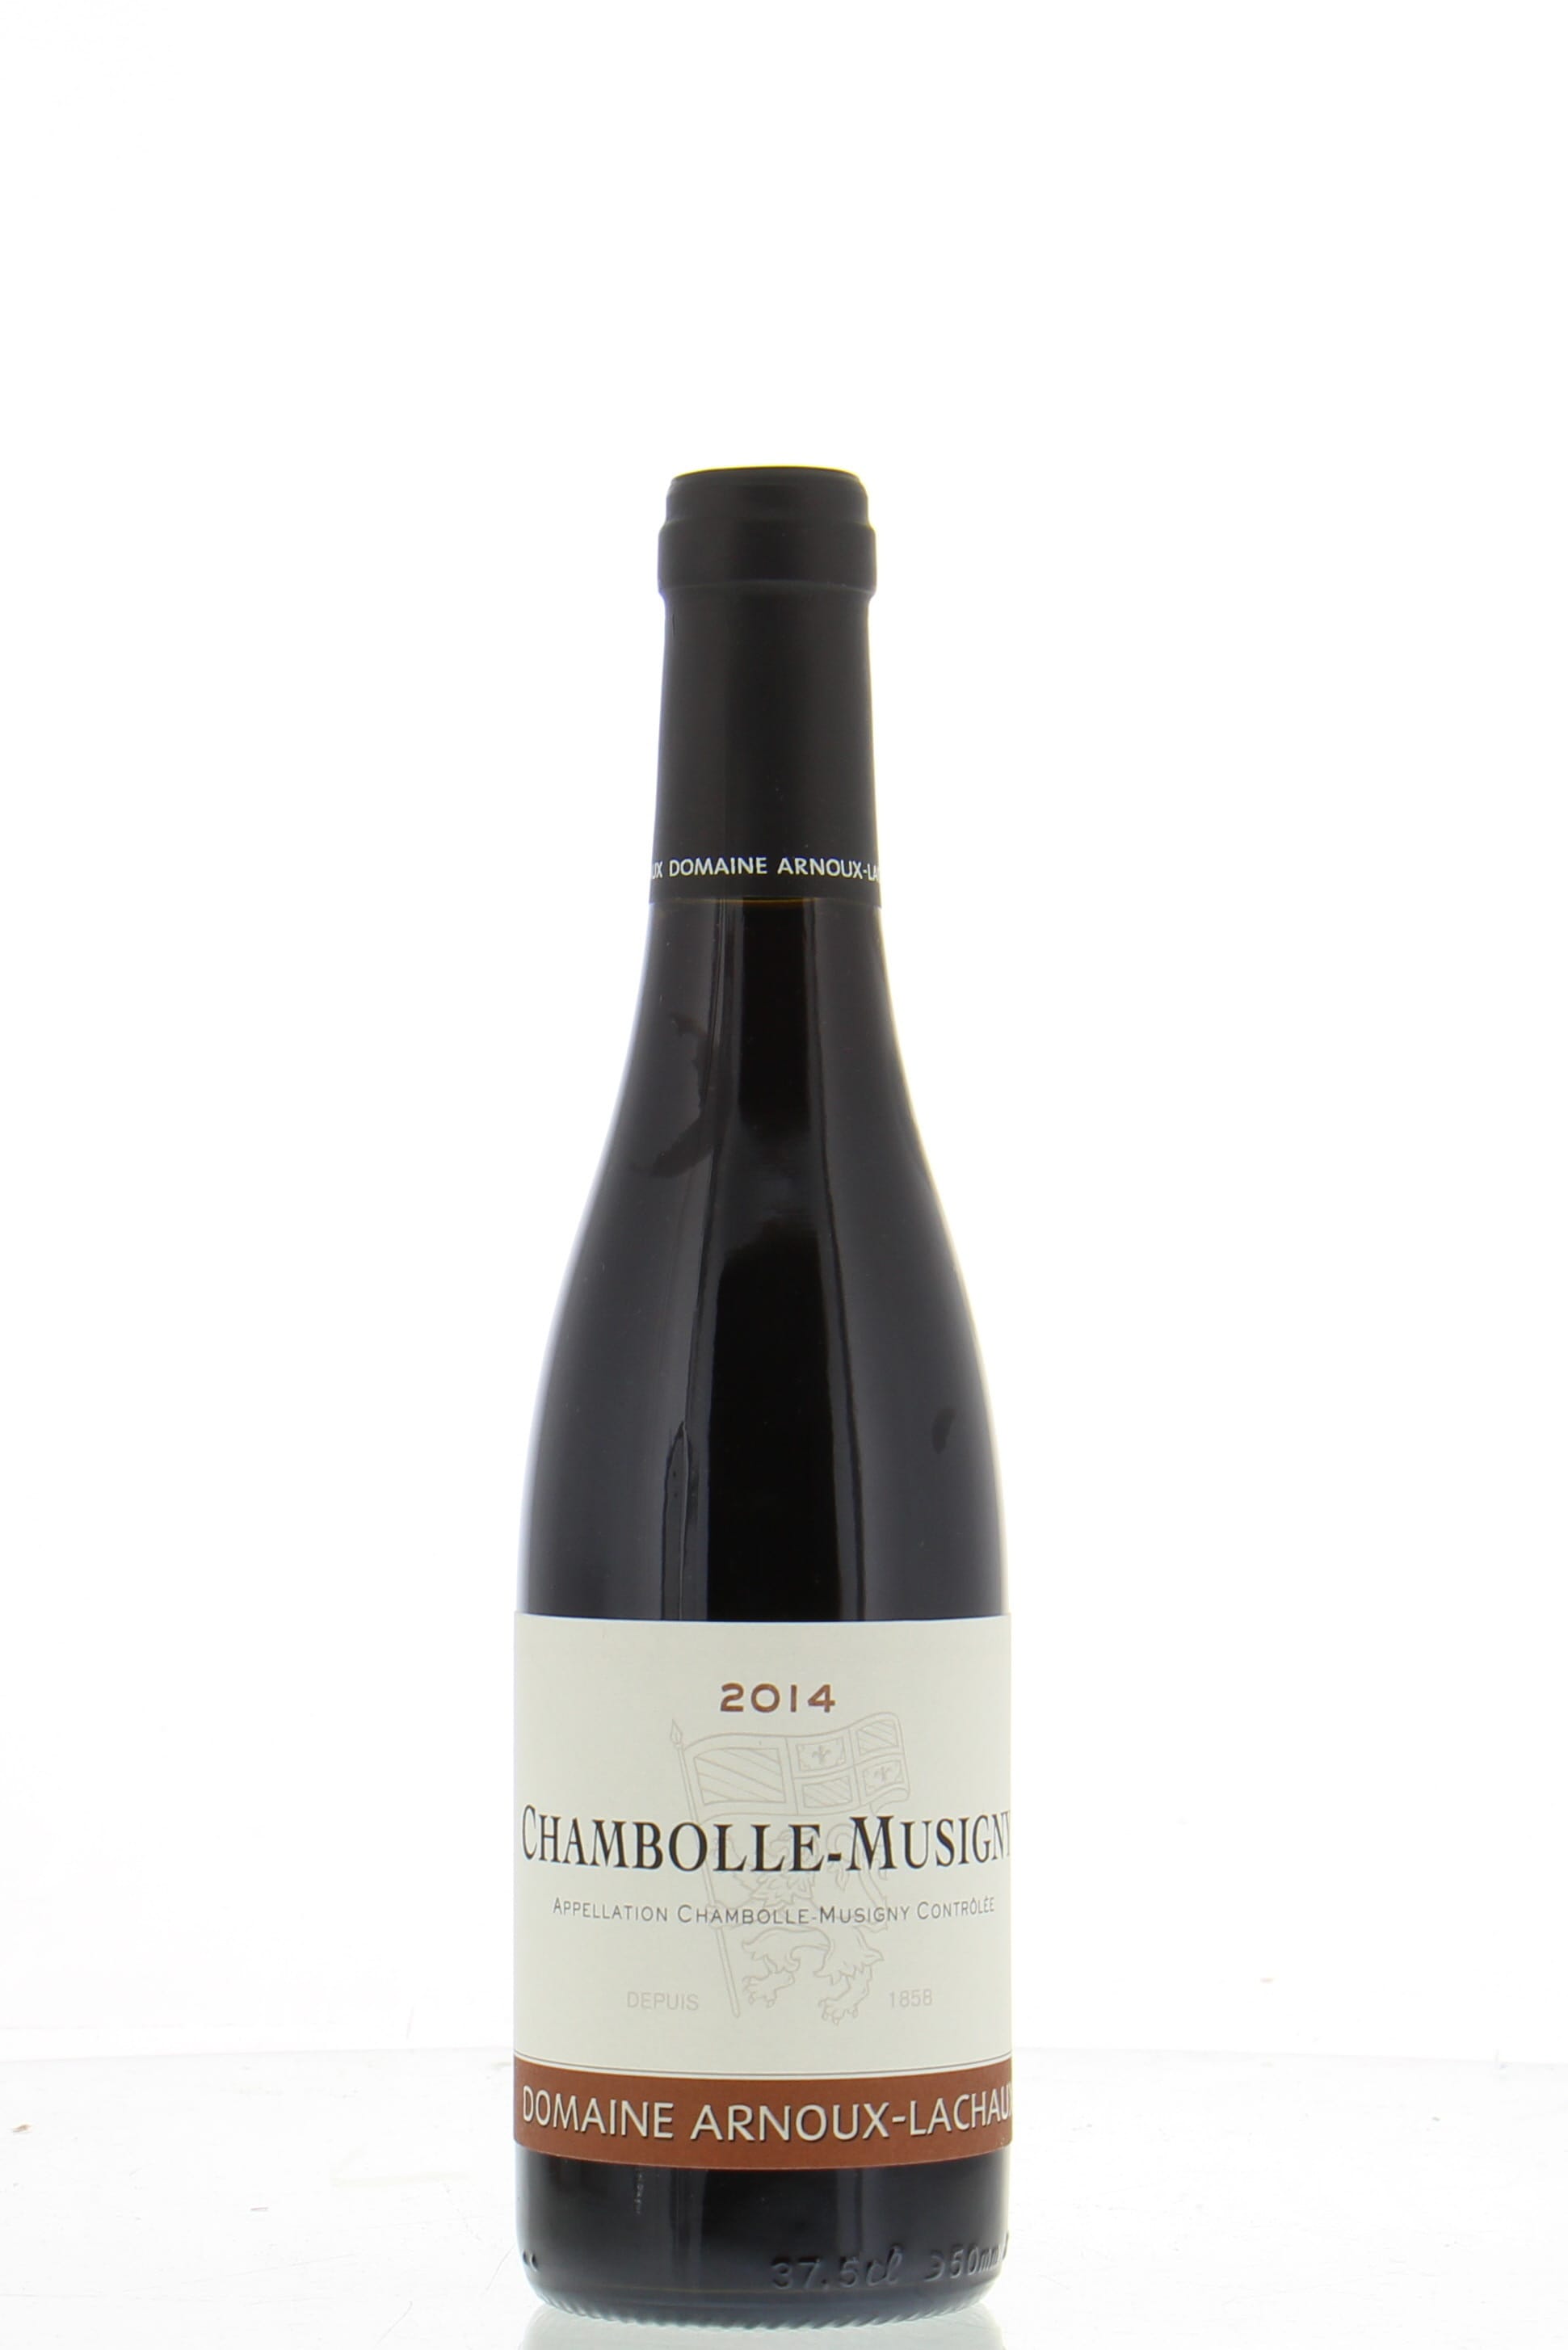 Arnoux-Lachaux - Chambolle Musigny 2014 Perfect